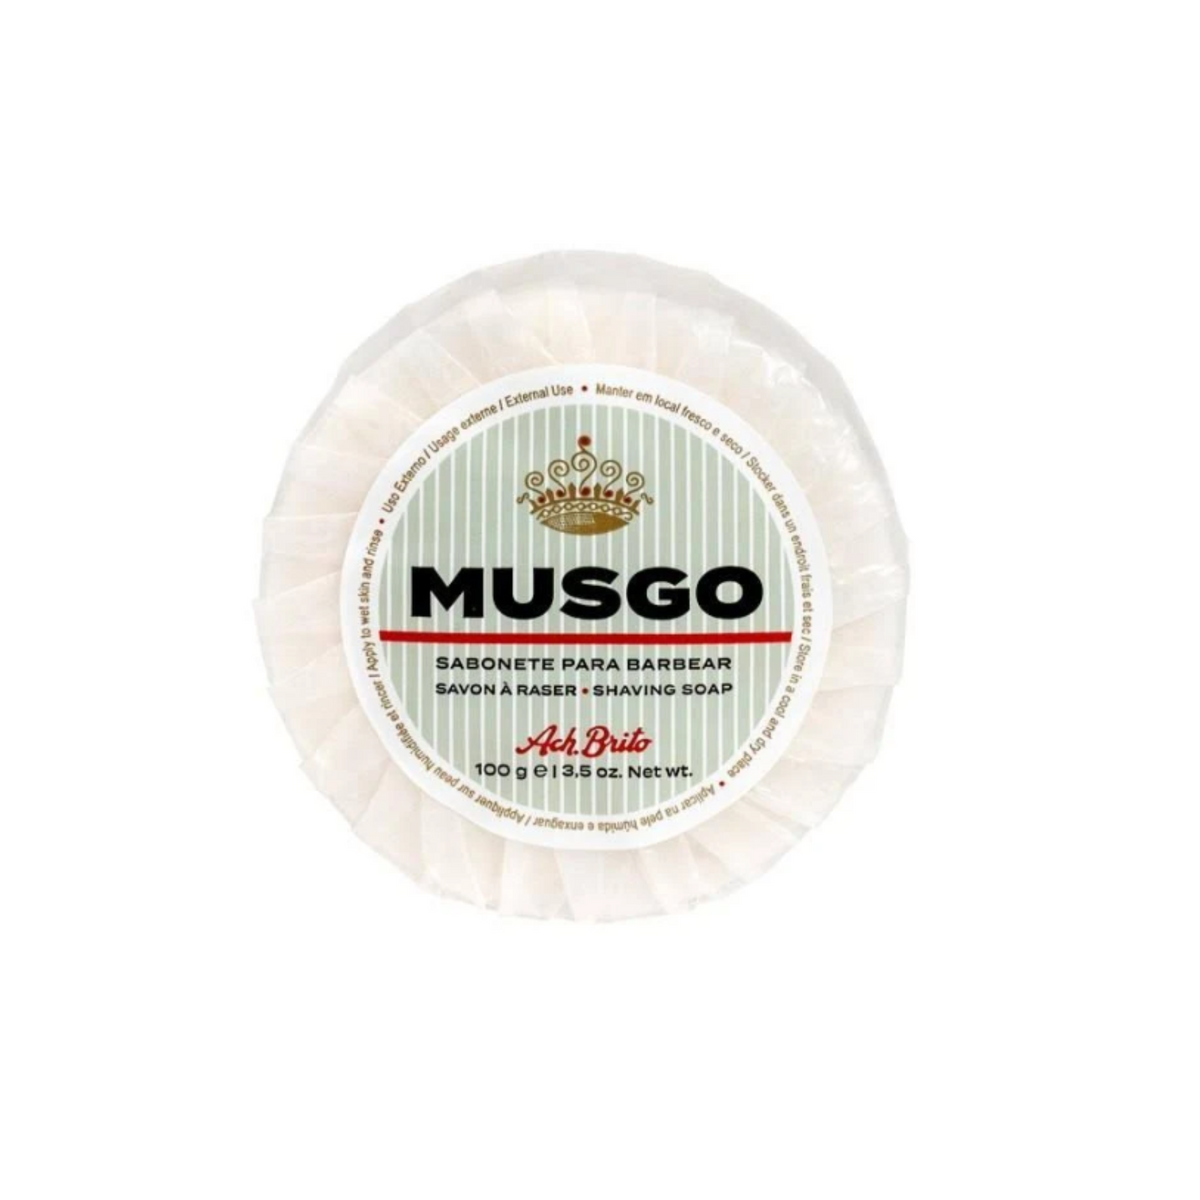 Primary image of Musgo Shave Soap